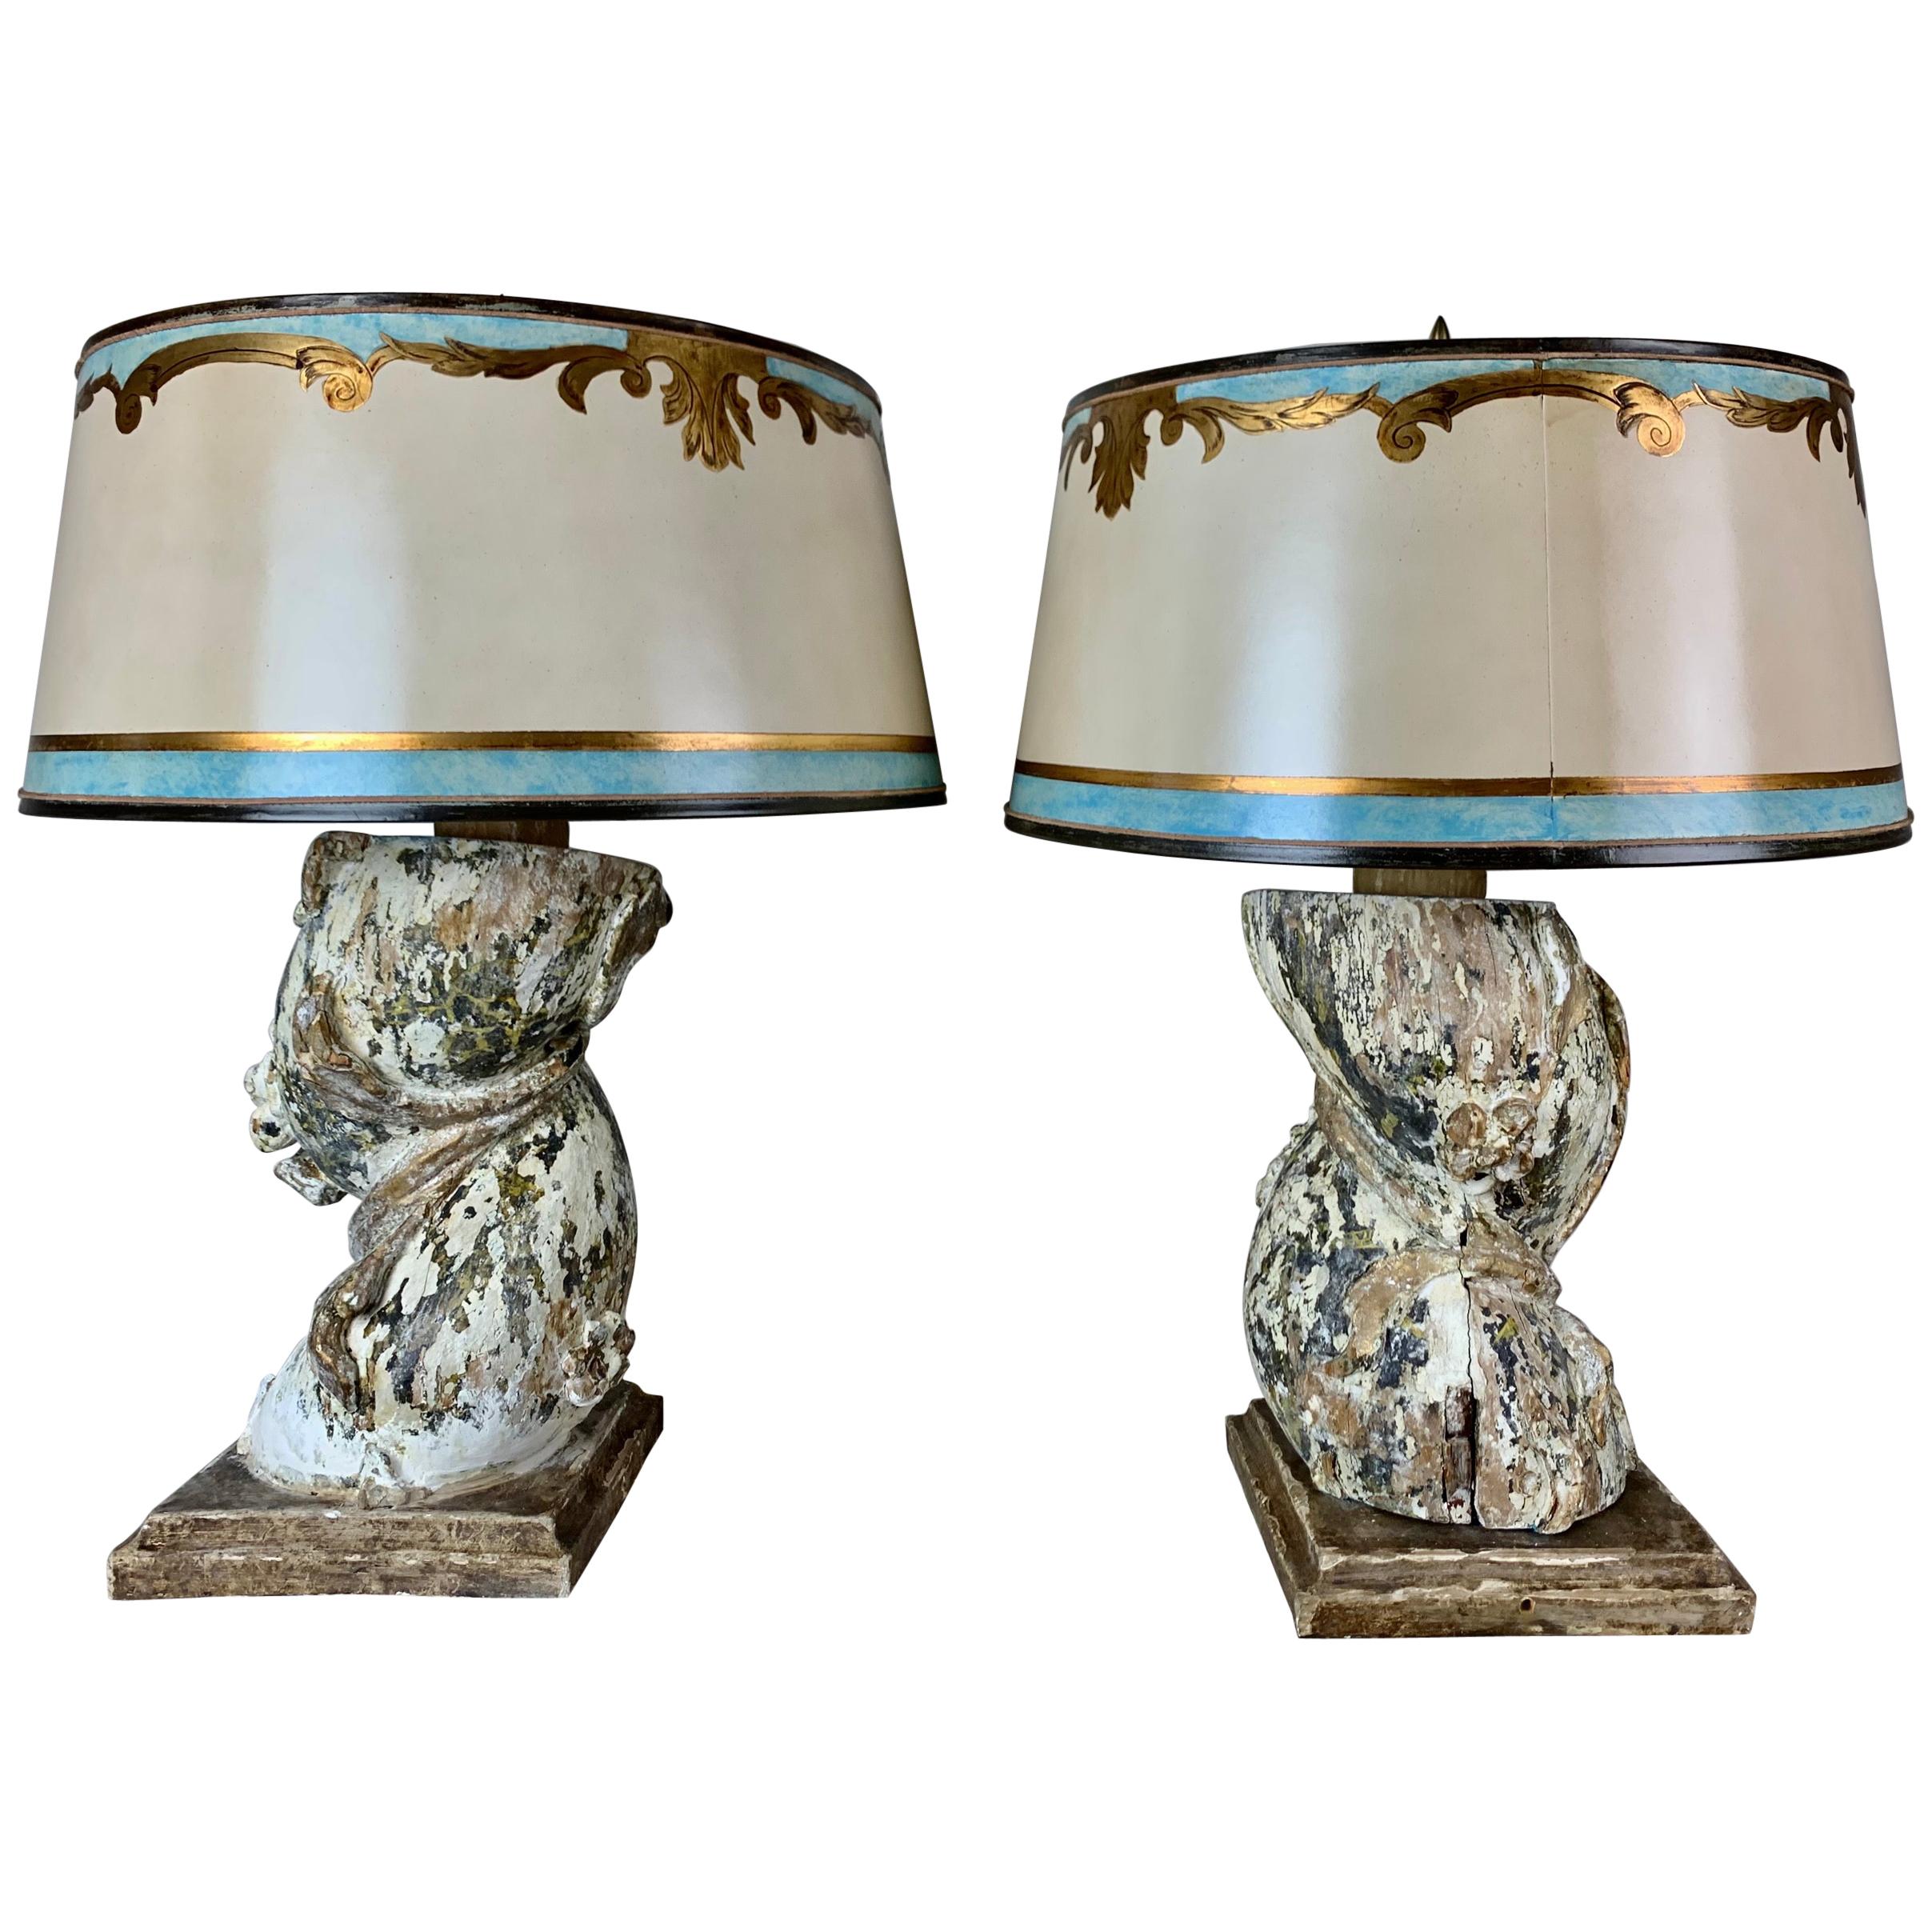 Italian Pained Column Lamps with Parchment Shades, Pair